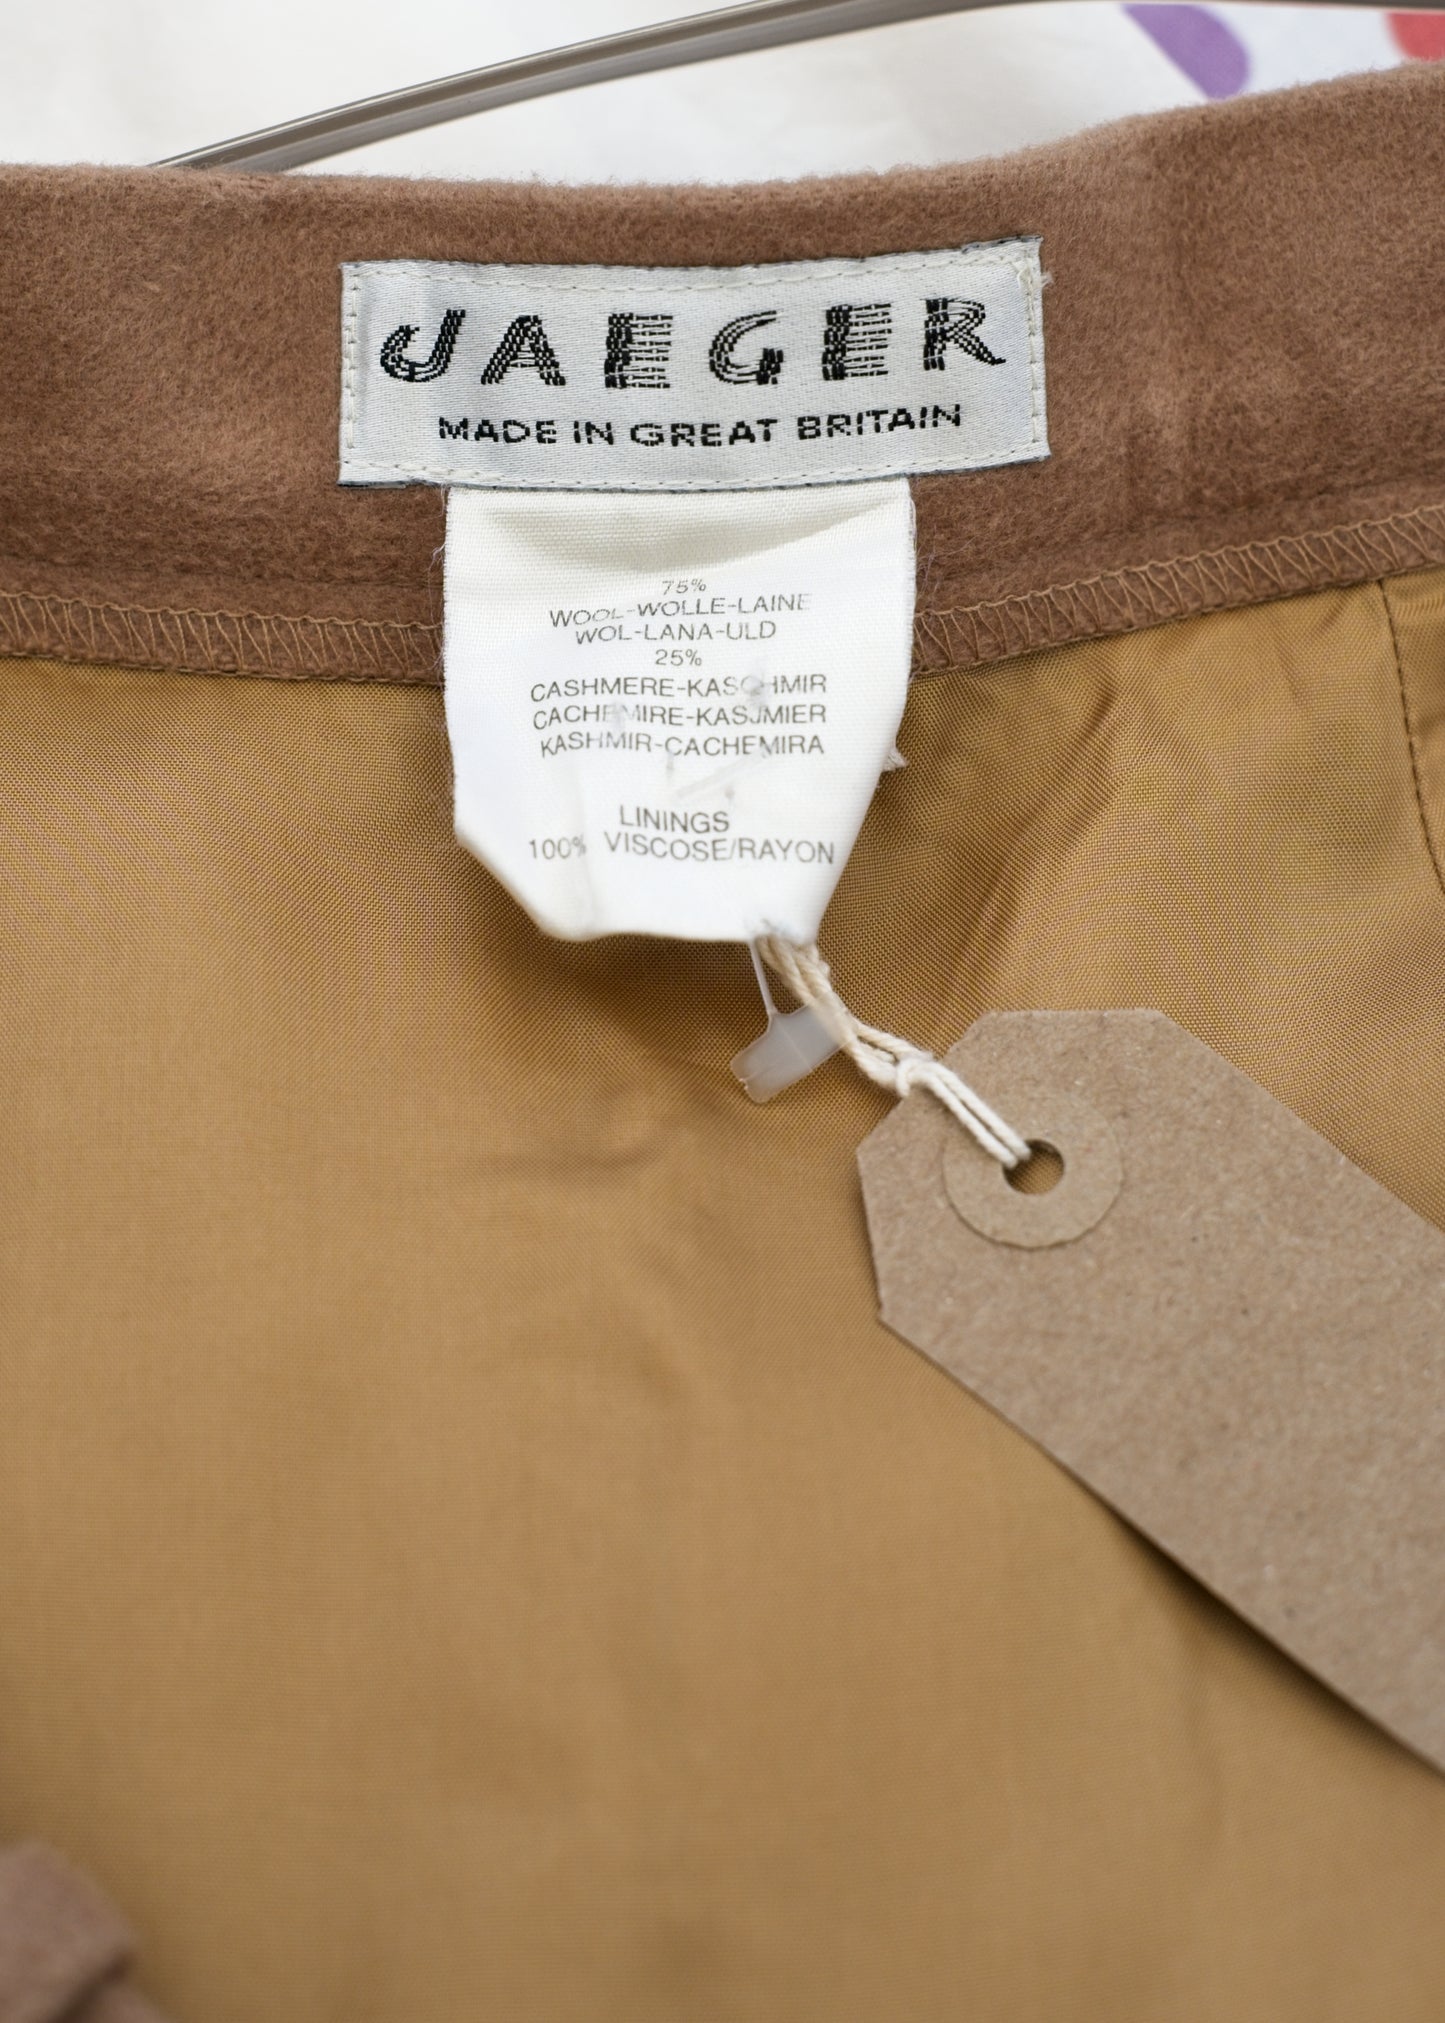 Jaeger made in Great Britain cashmere skirt